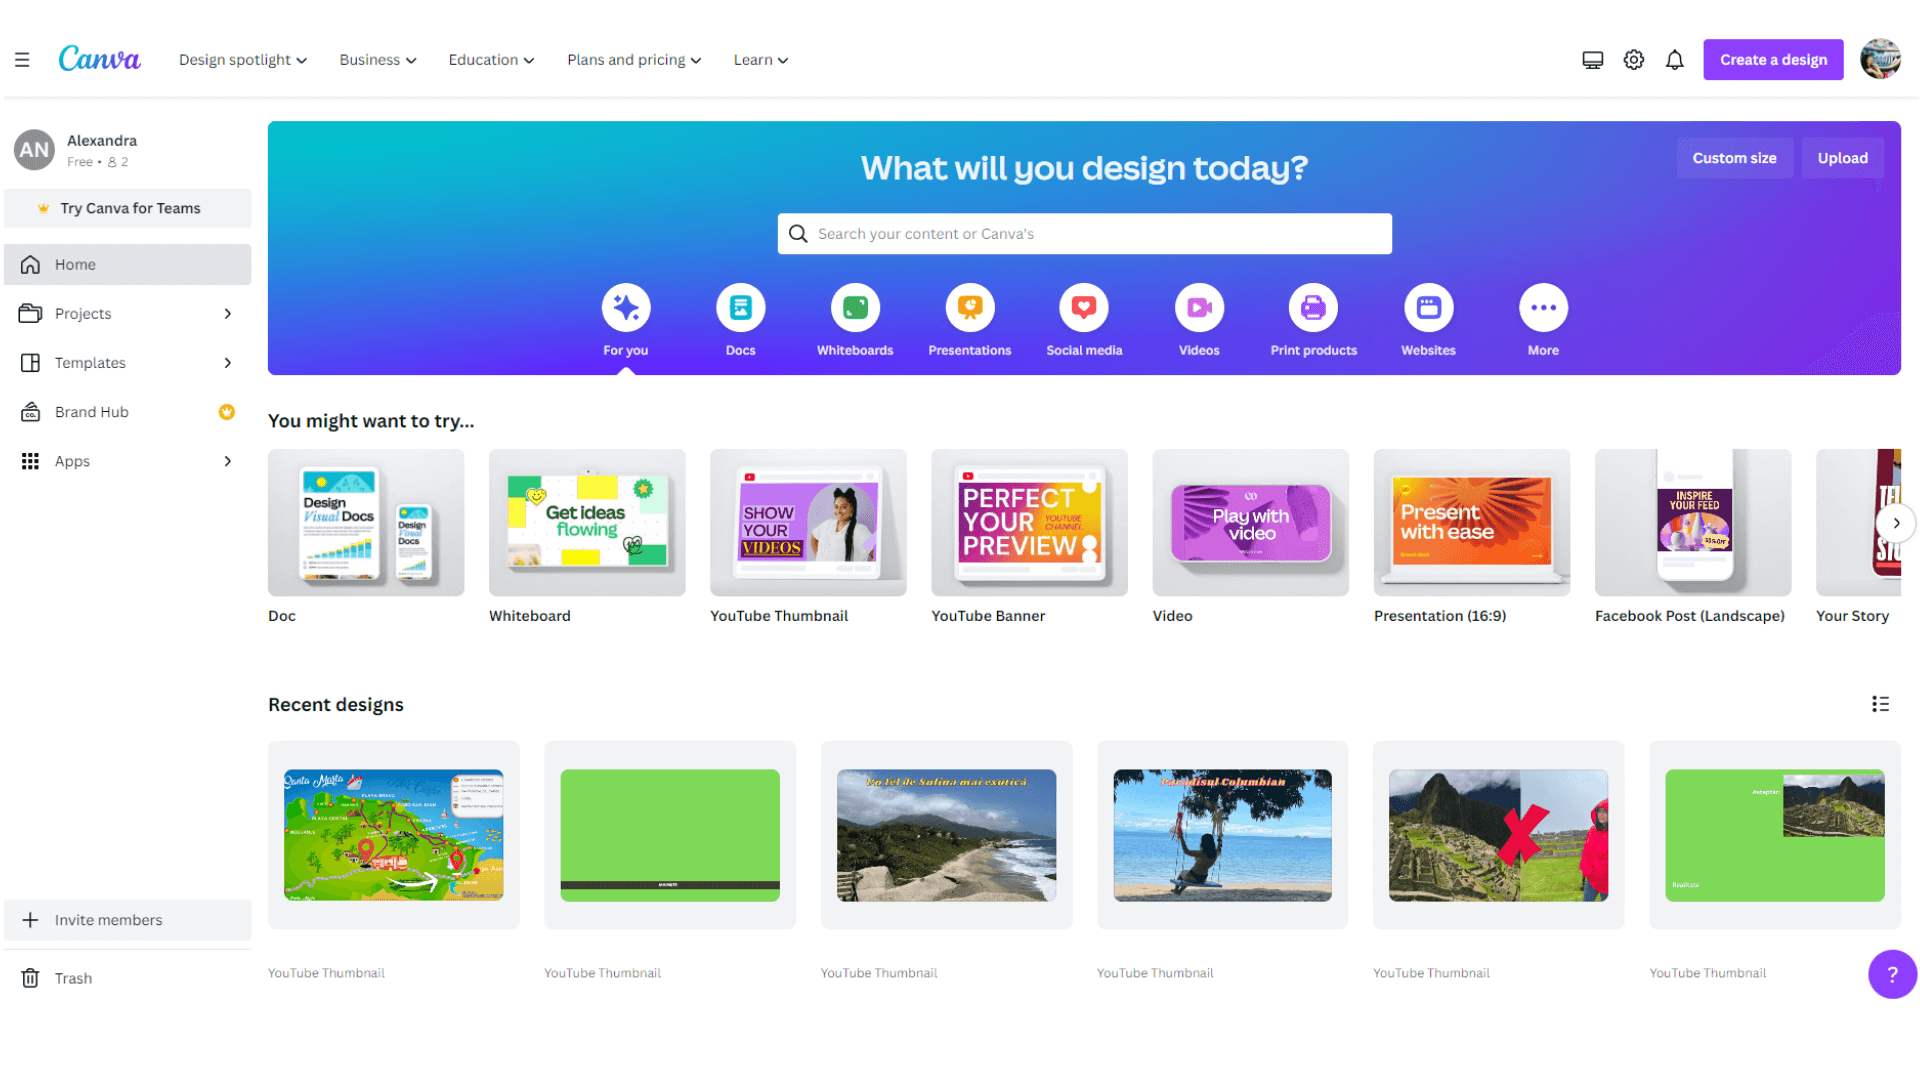 Canva screenshot showing multiple design assets such as youtube thumbnail, youtube banner, video, presentation or facebook post.